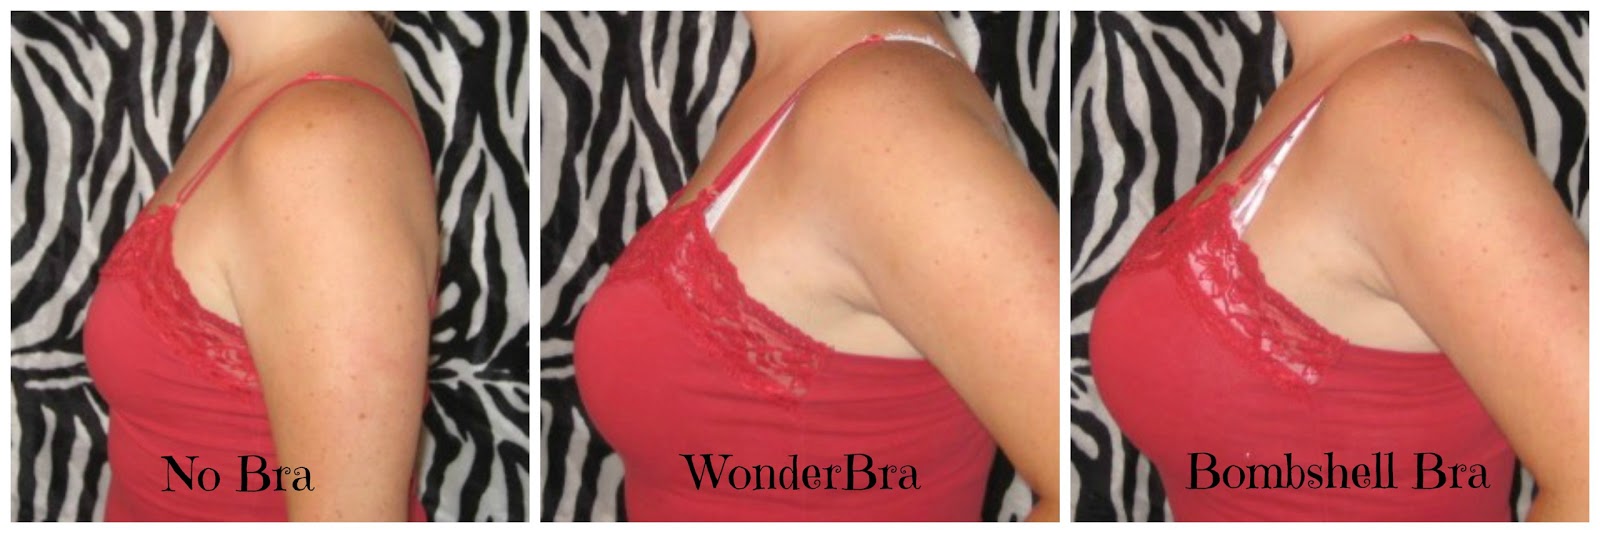 Honeylove Blog: Push-up bras vs. Padded bras: What's the difference?